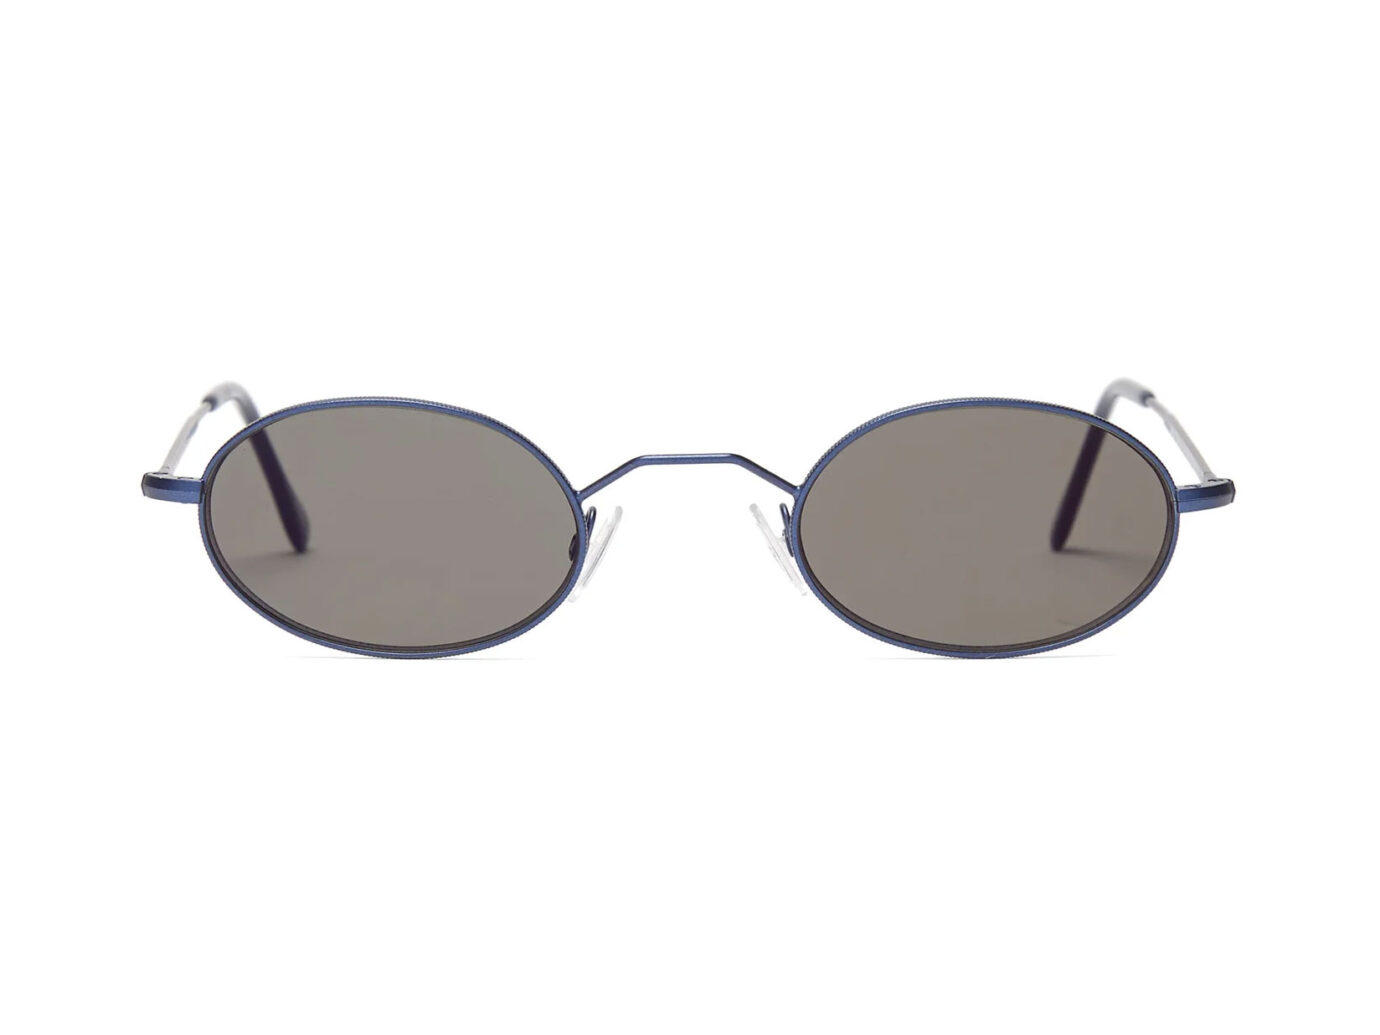 ANDY WOLF Armstrong oval metal sunglasses